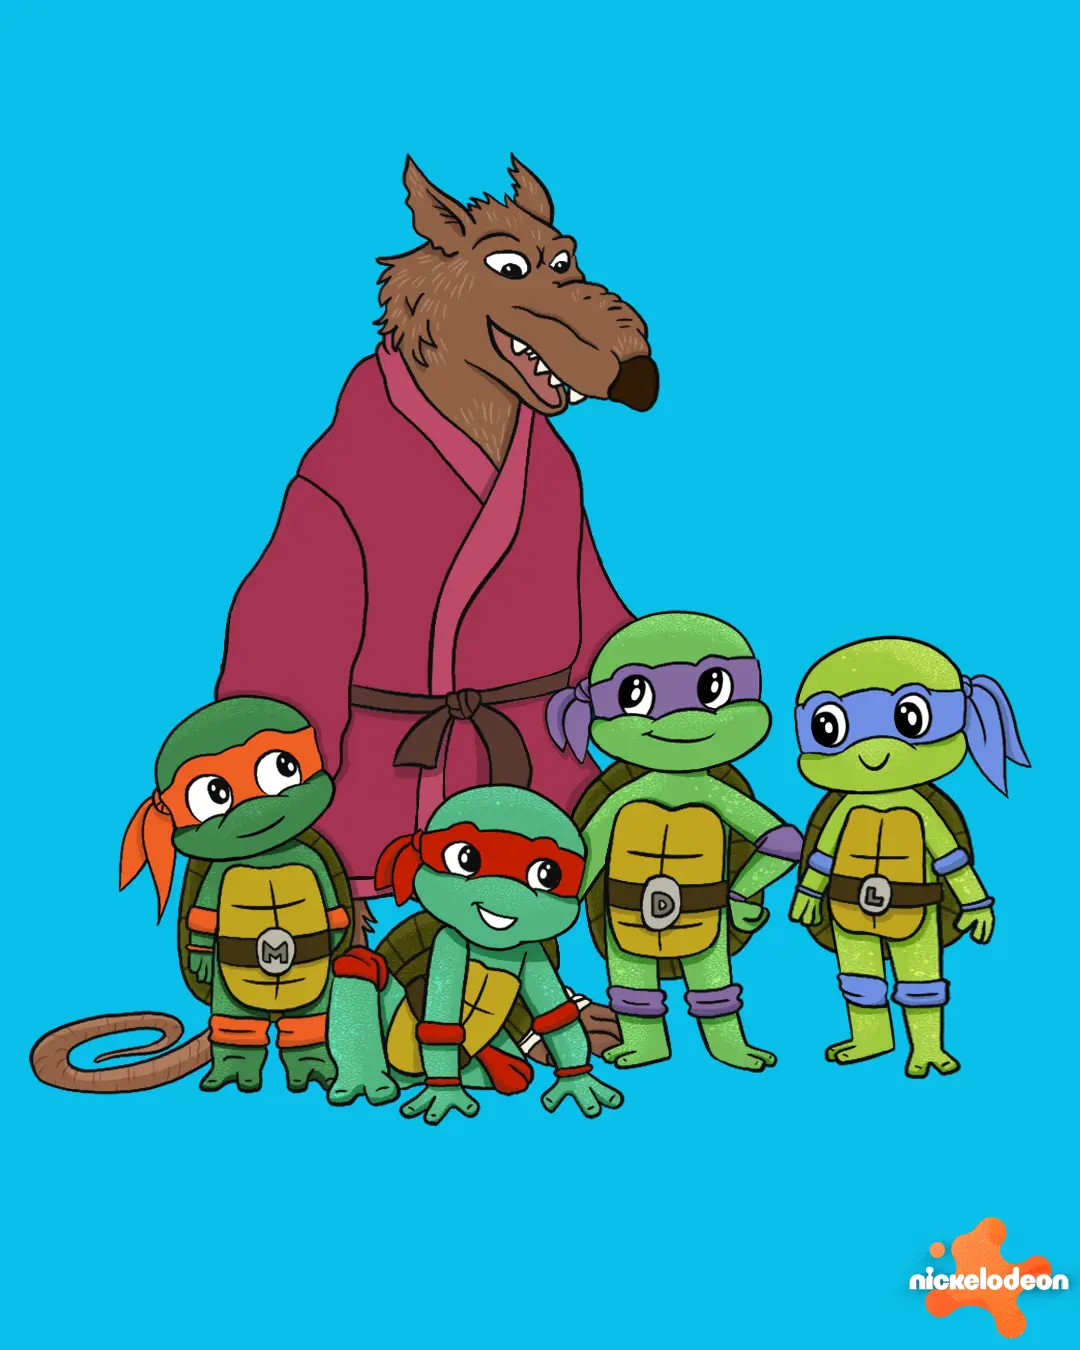 Master Splinter is the father of the four mutant ninja turtles